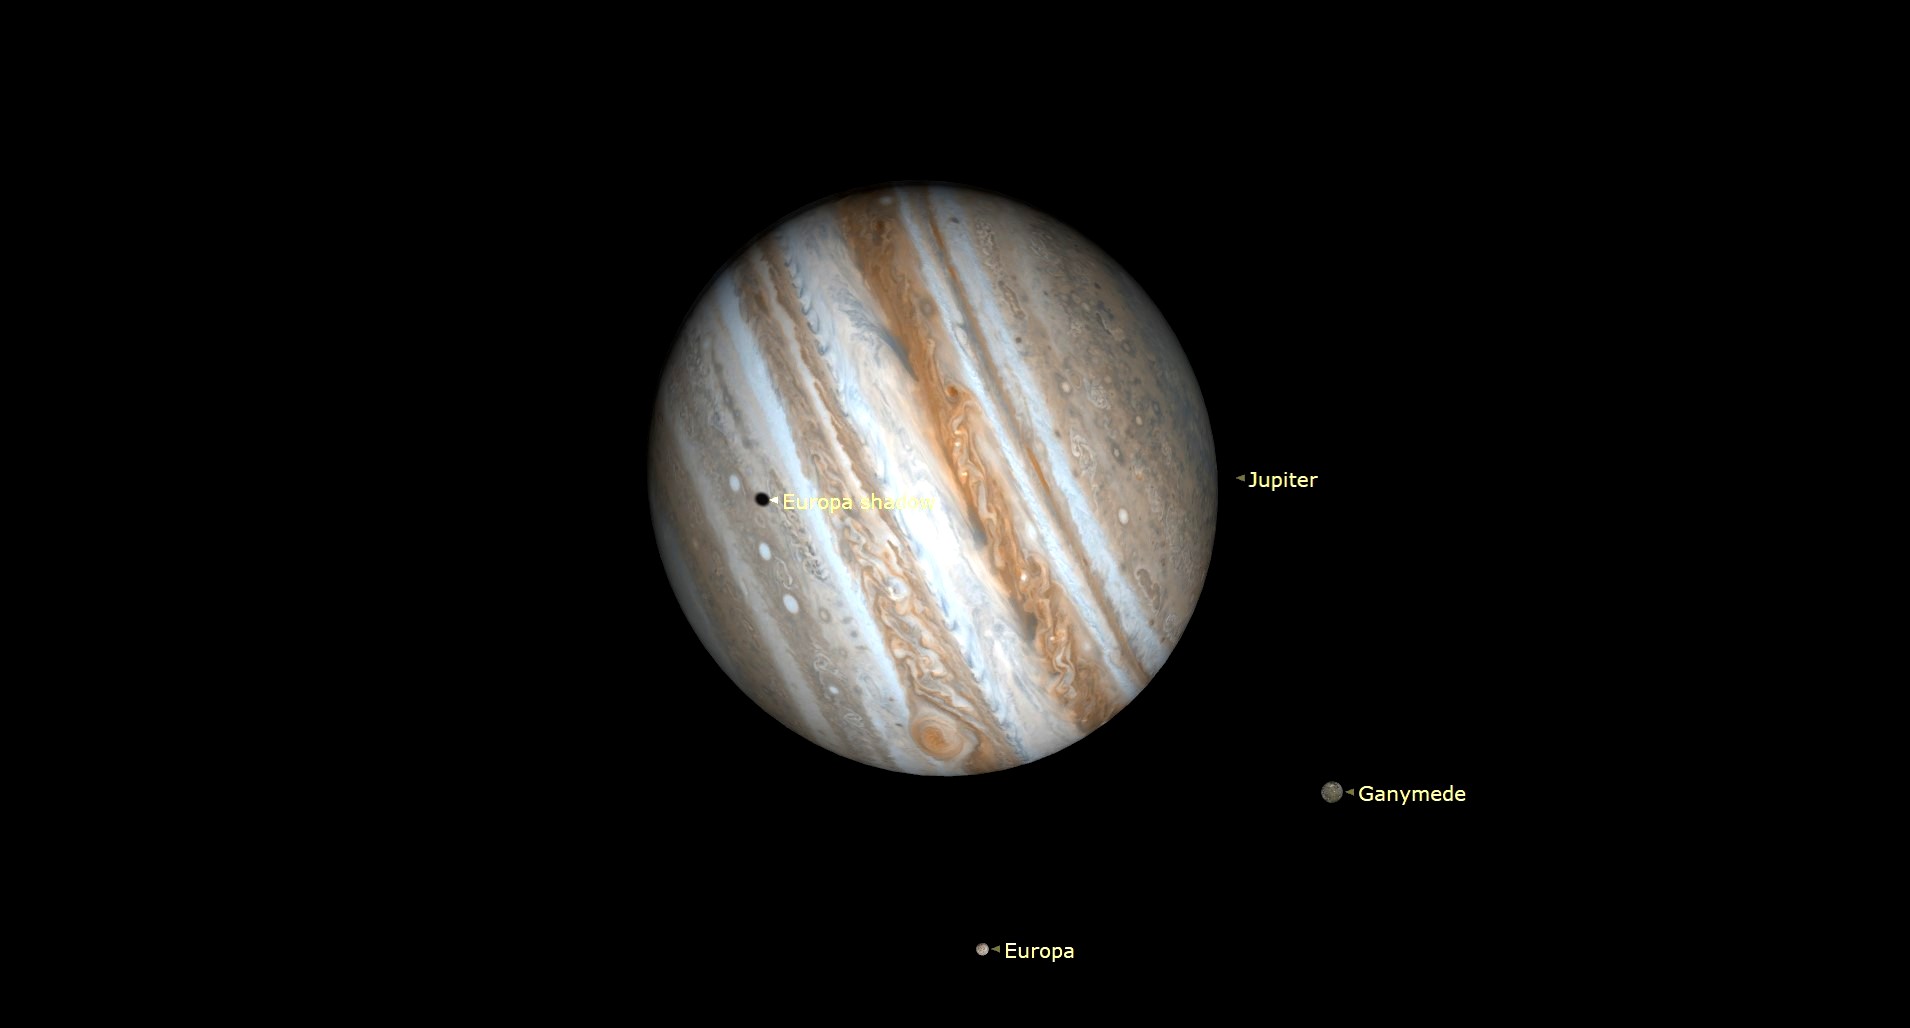 Jupiter is tilted with oblique gas lines, and the nearest moons are named Europa and Ganymede.  Europa's shadow is seen on Jupiter's surface and is named.